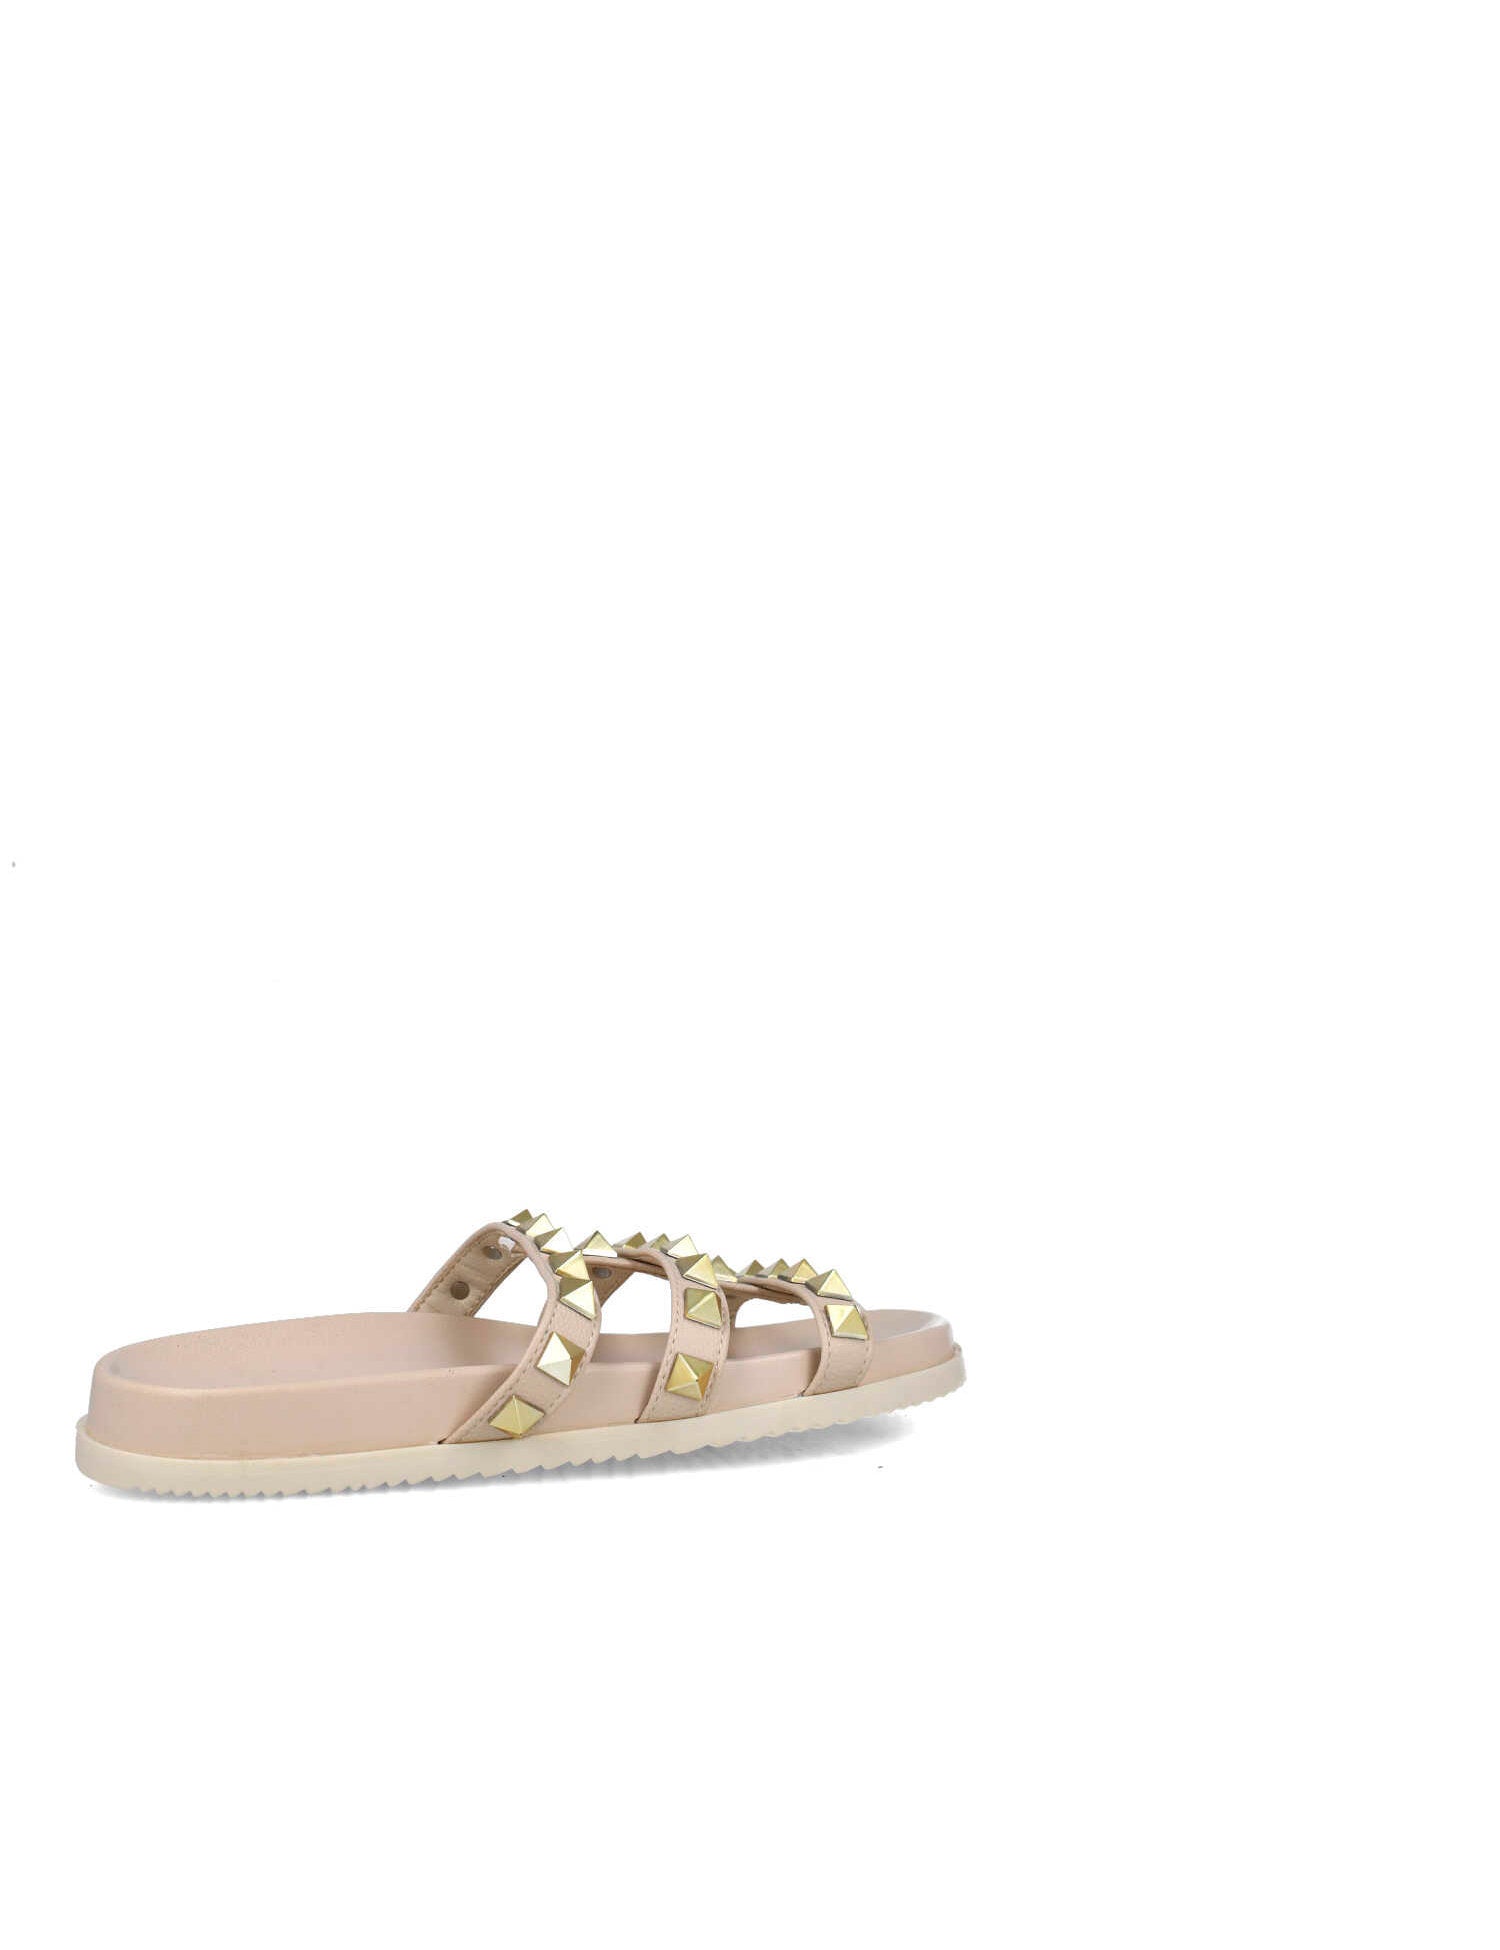 Beige Studded Slippers_24921_06_03